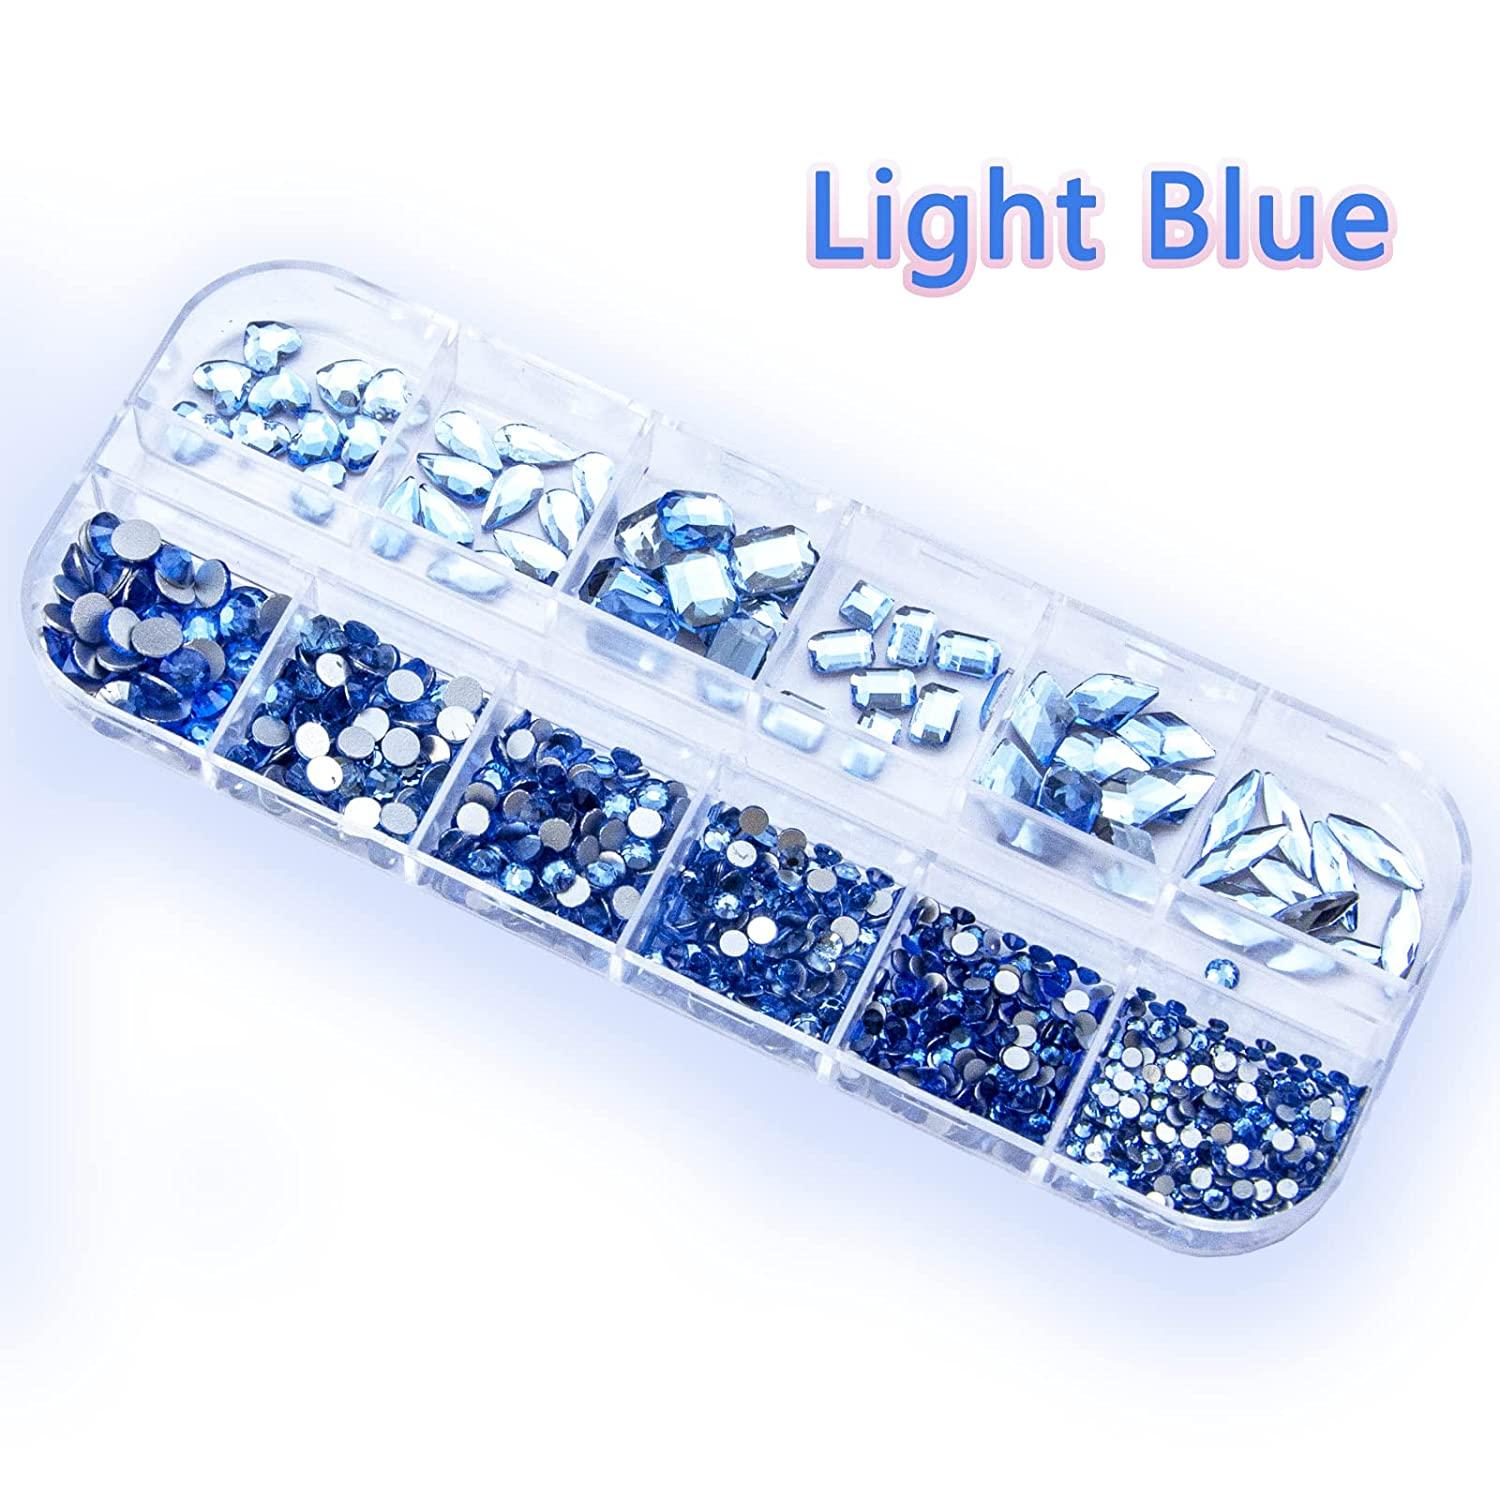 Beadsland Rhinestones for Makeup,8 Sizes 2500pcs Blue Flatback Rhinestones  Face Gems for Nails Crafts with Tweezers and Wax Pencil,Blue